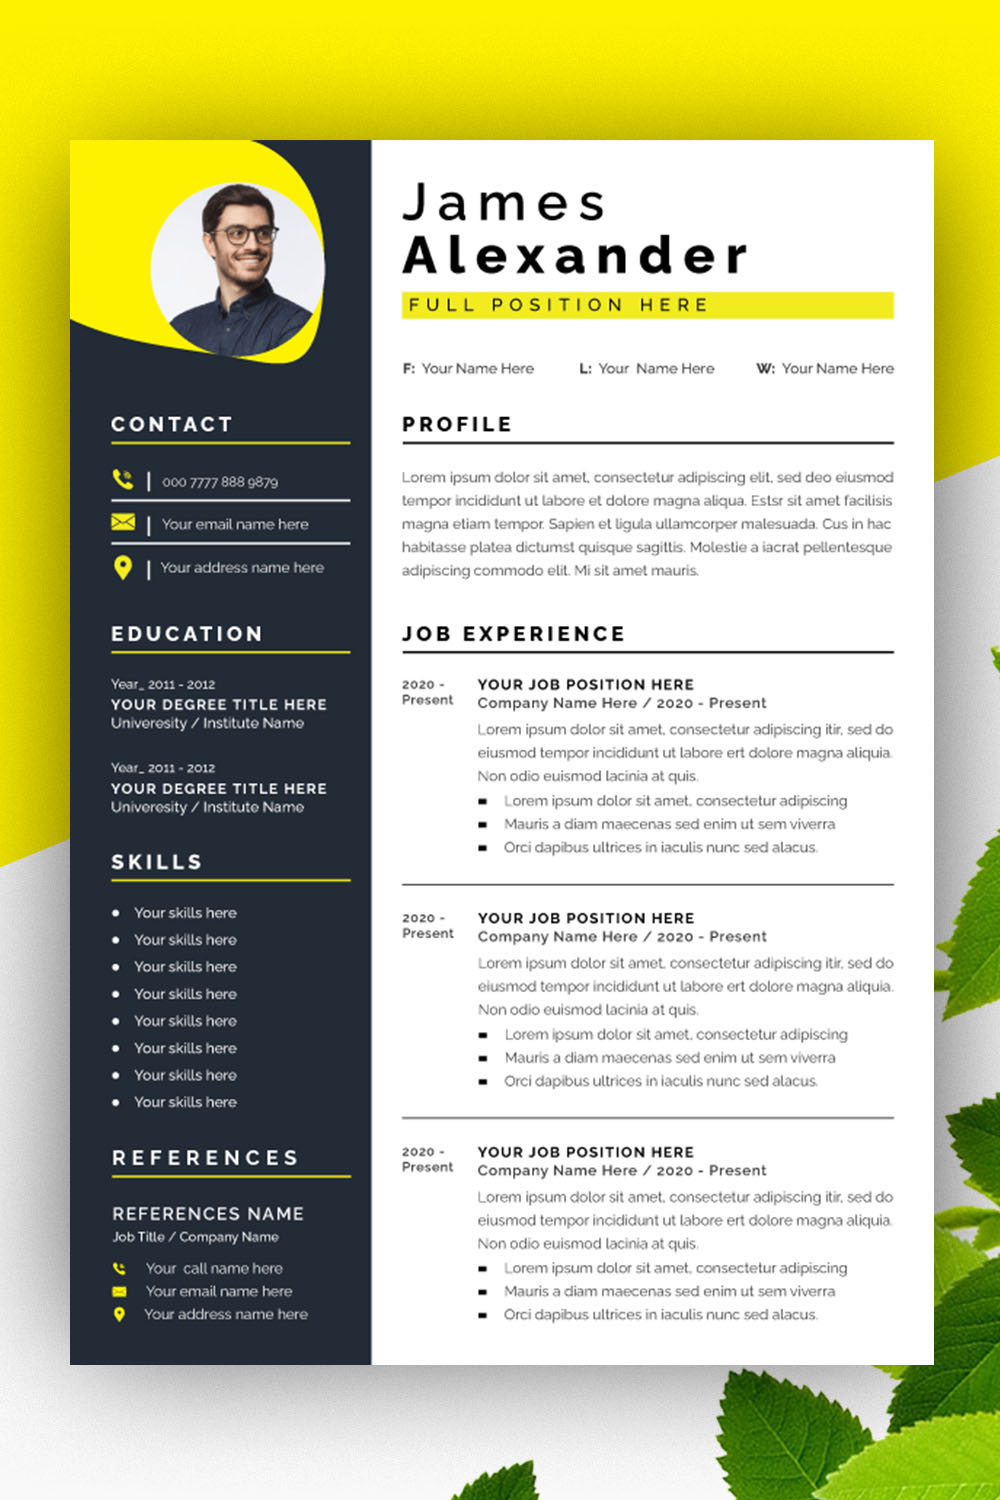 Resume Design Template with Yoello Color pinterest preview image.